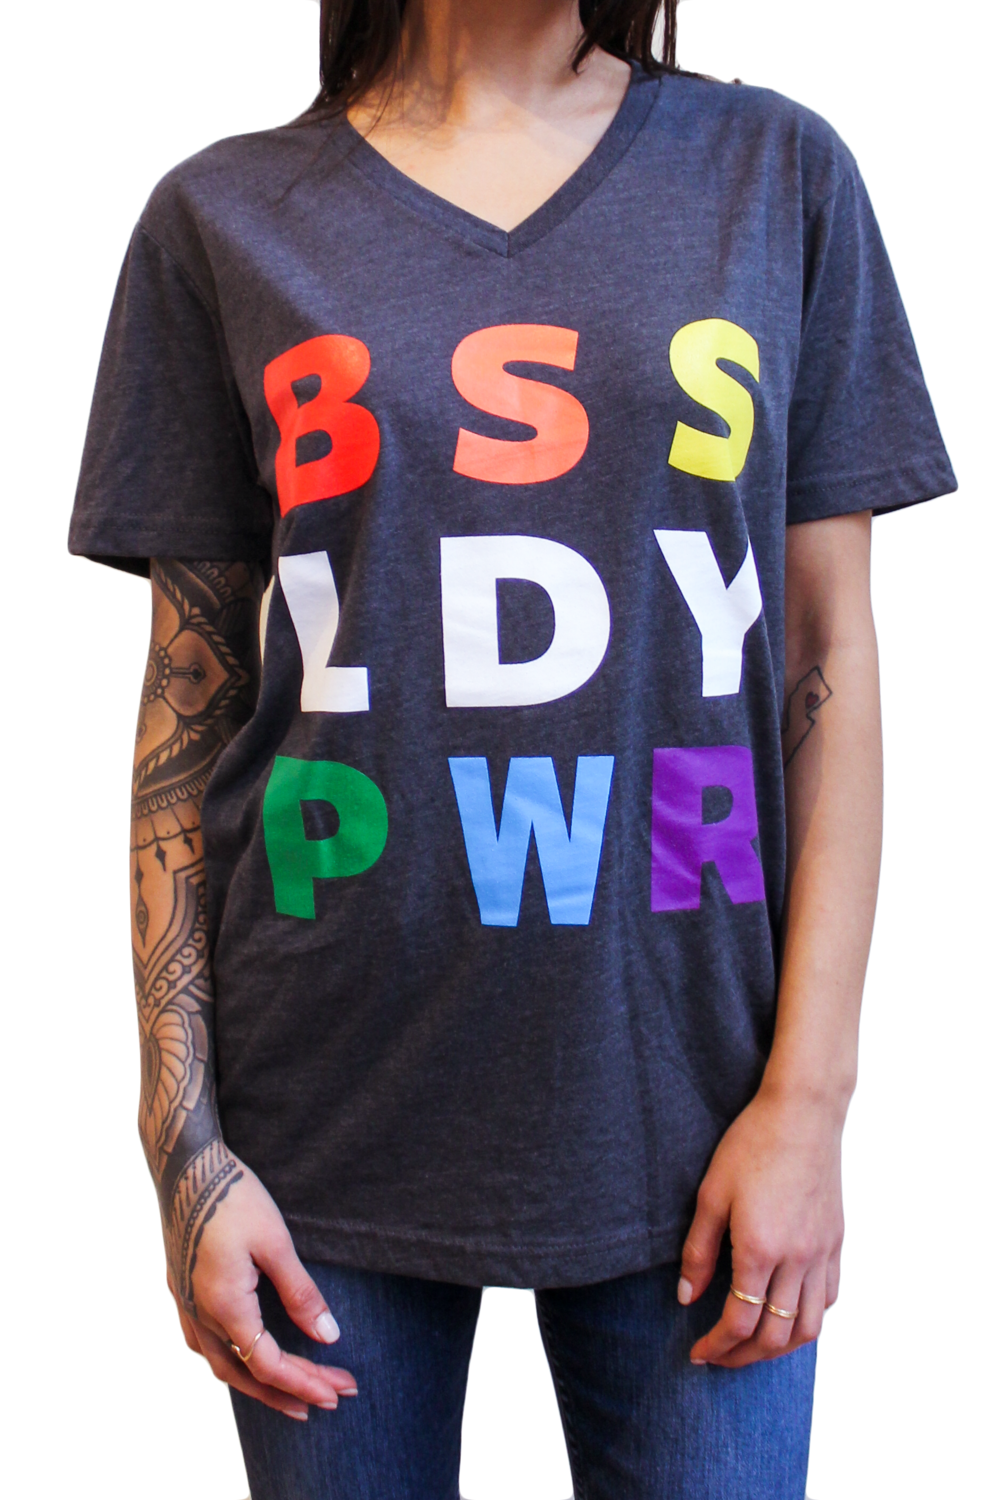 BSS LDY PWR Pride V-neck Tee